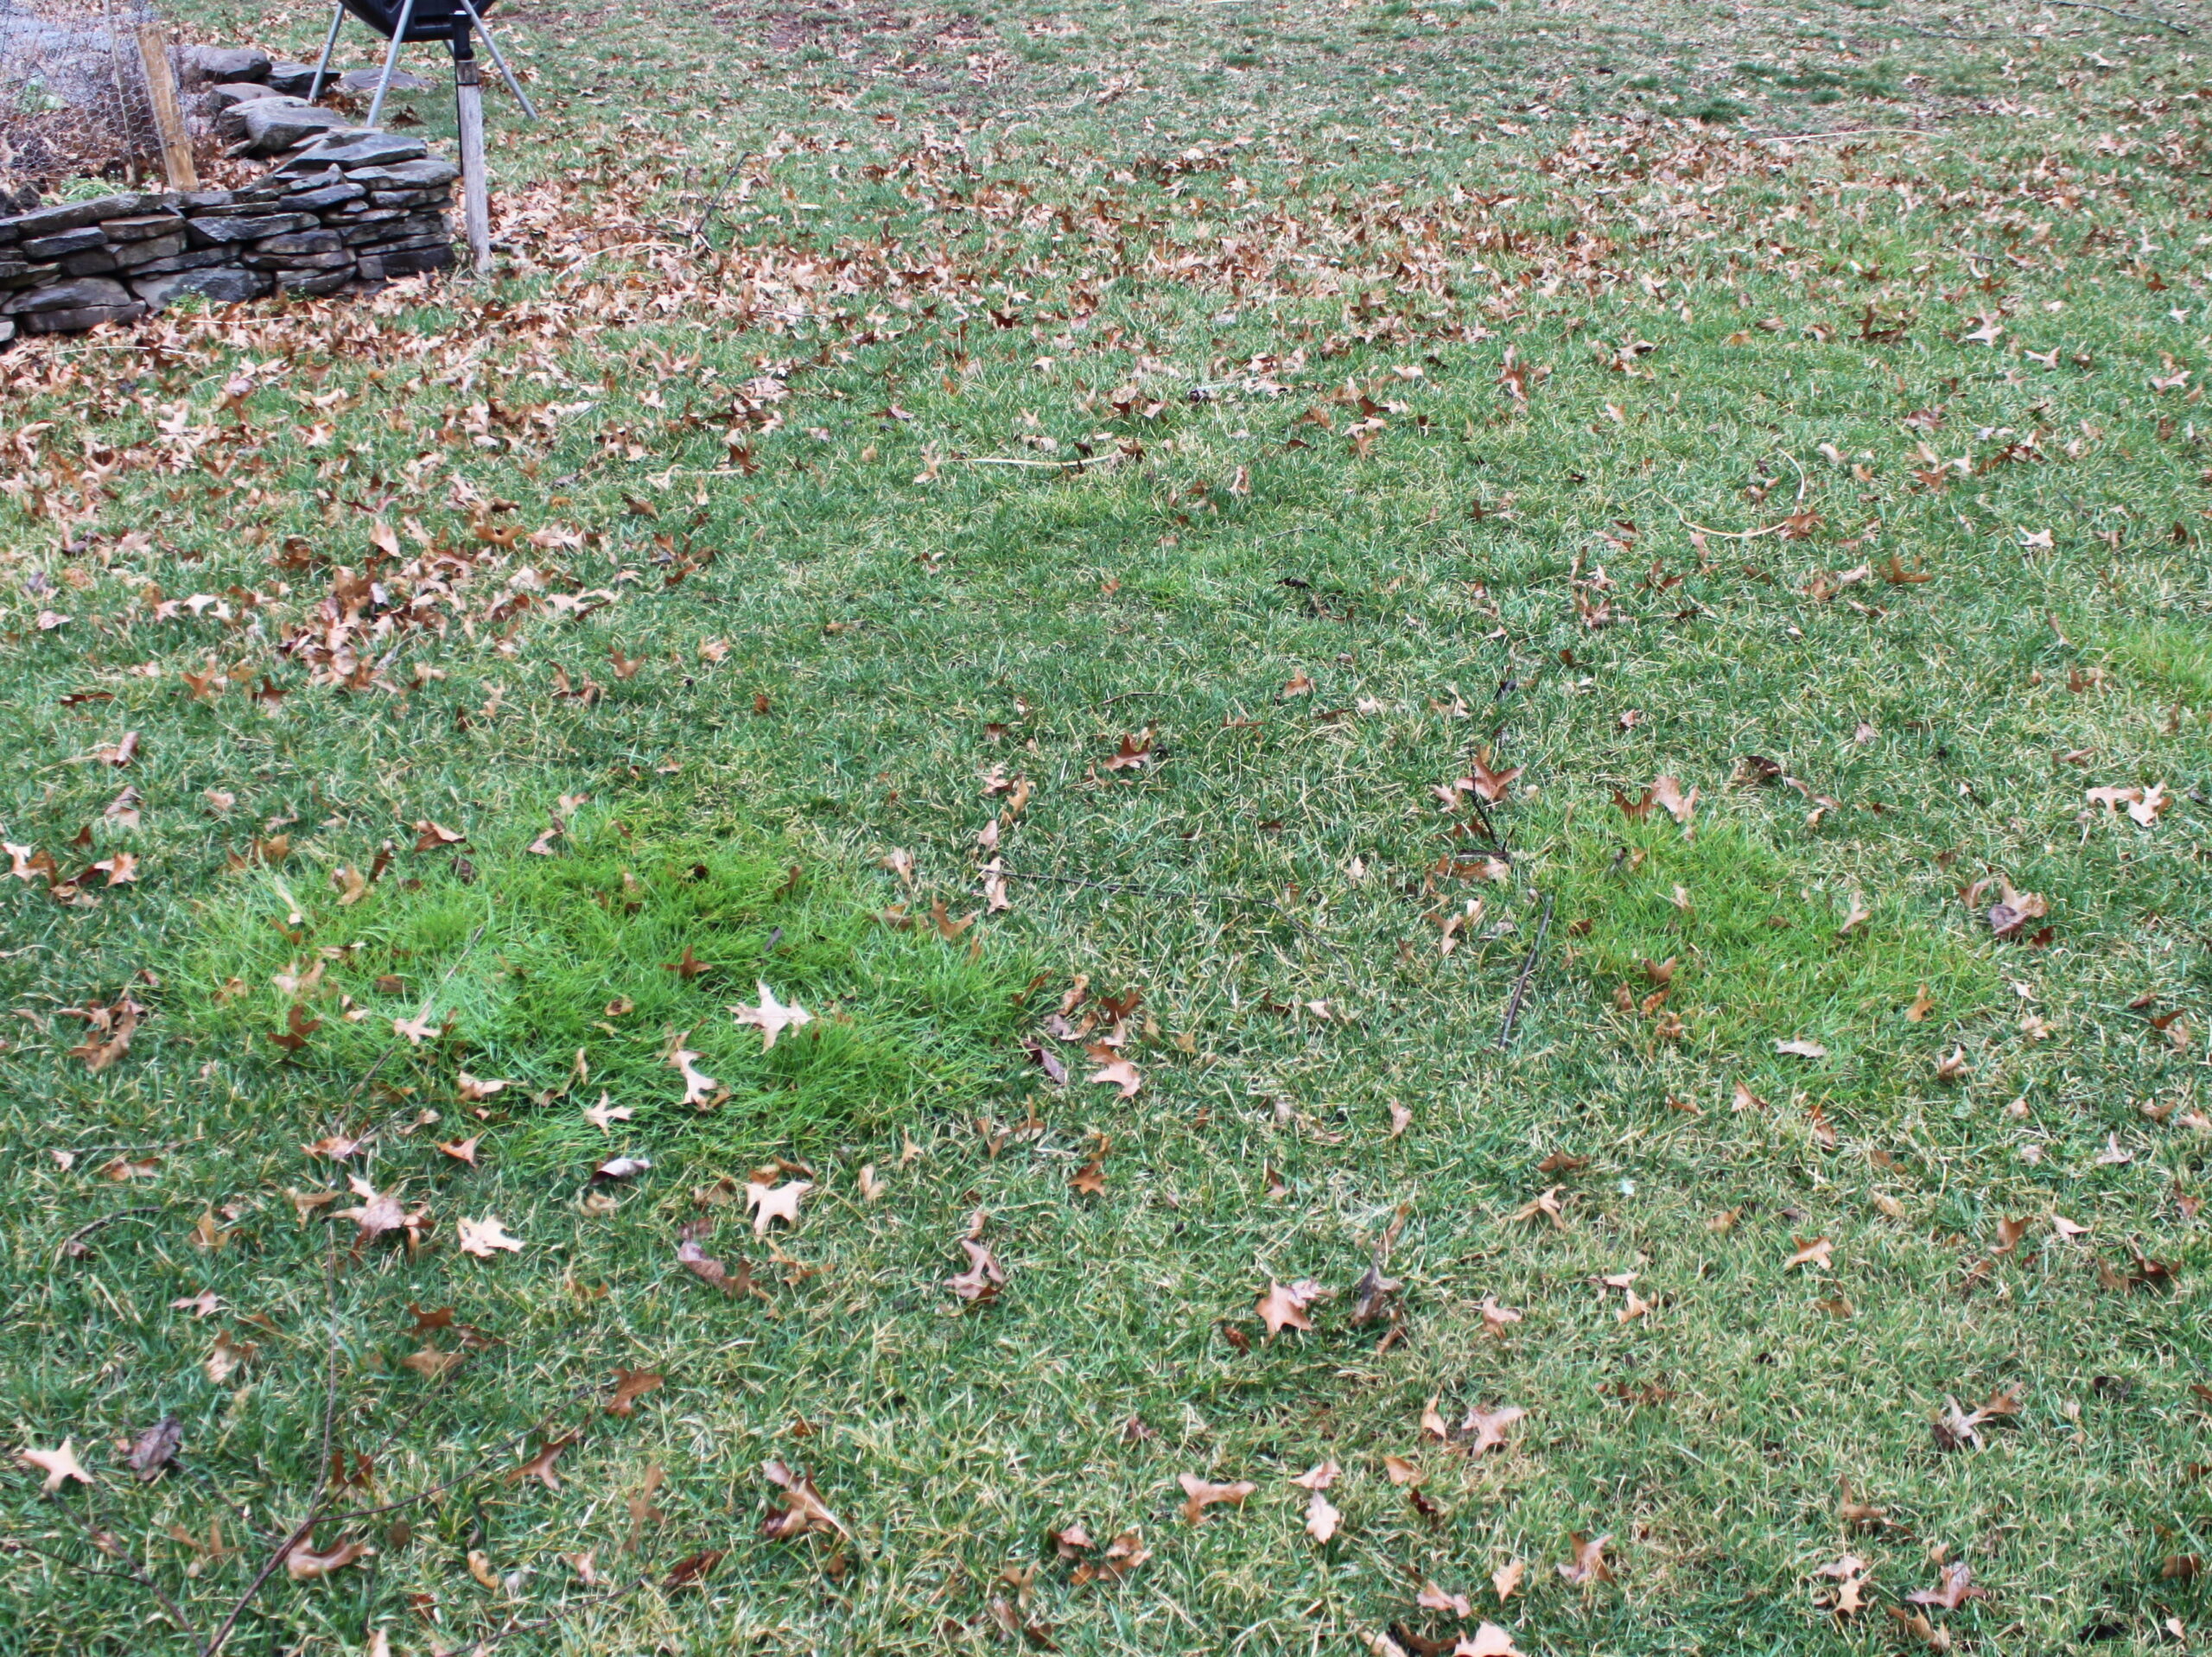 Patch of roughstalk bluegrass in a lawn.